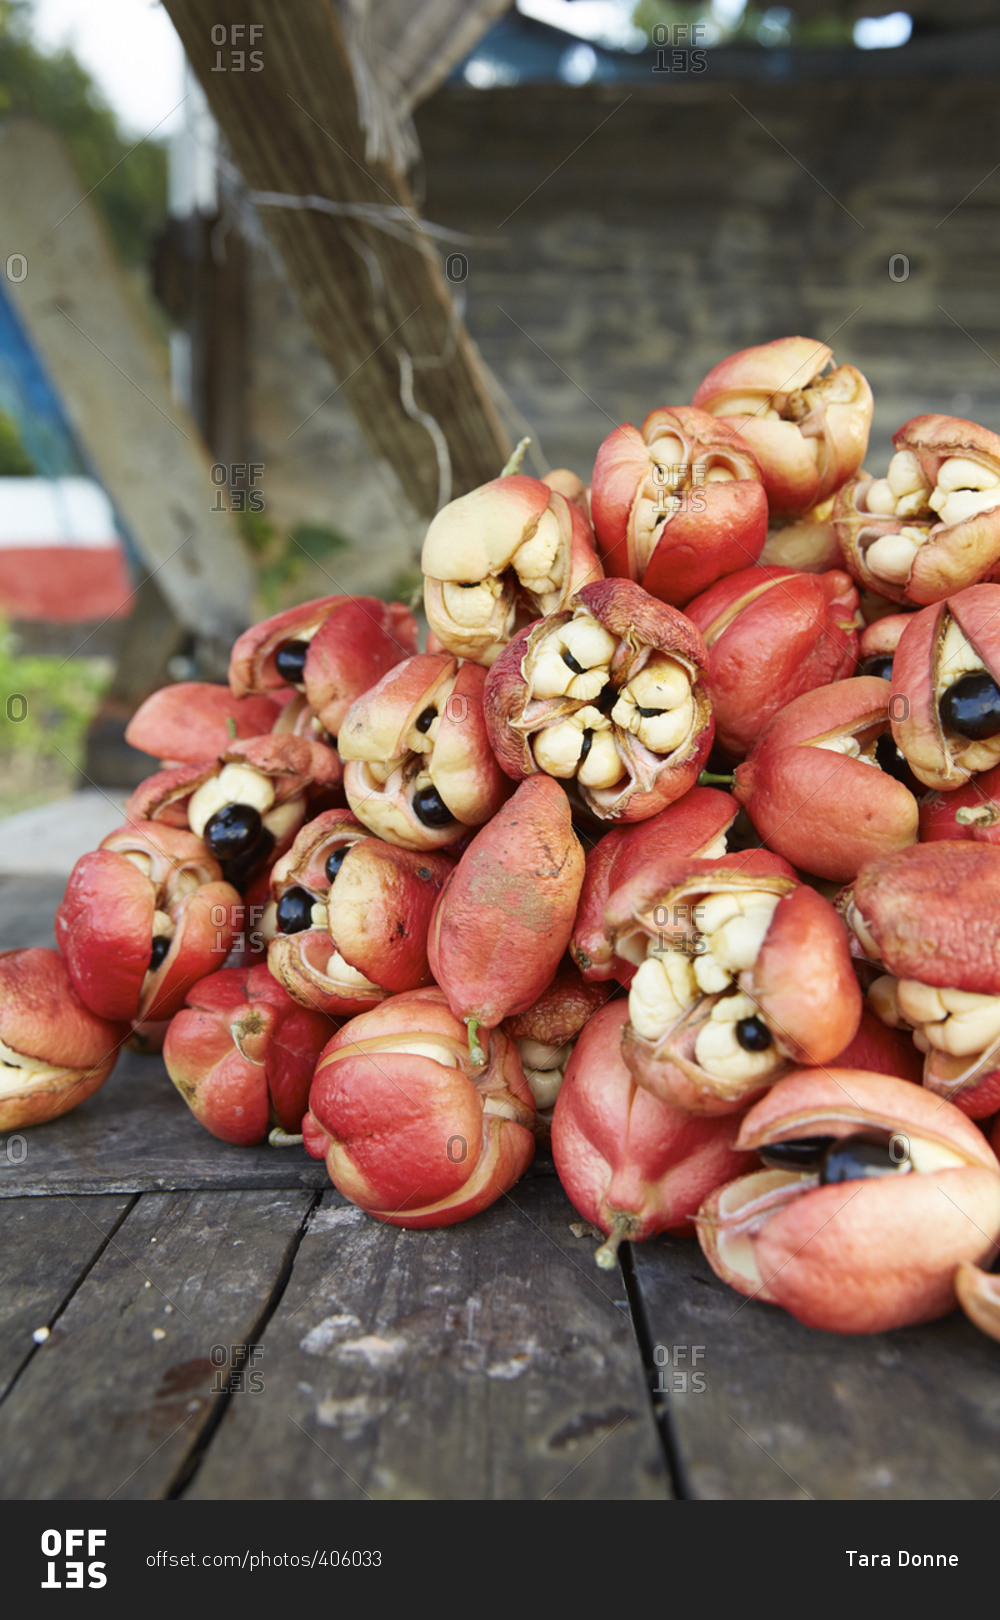 Ackee fruit at a fruit stand near Falmouth, Jamaica